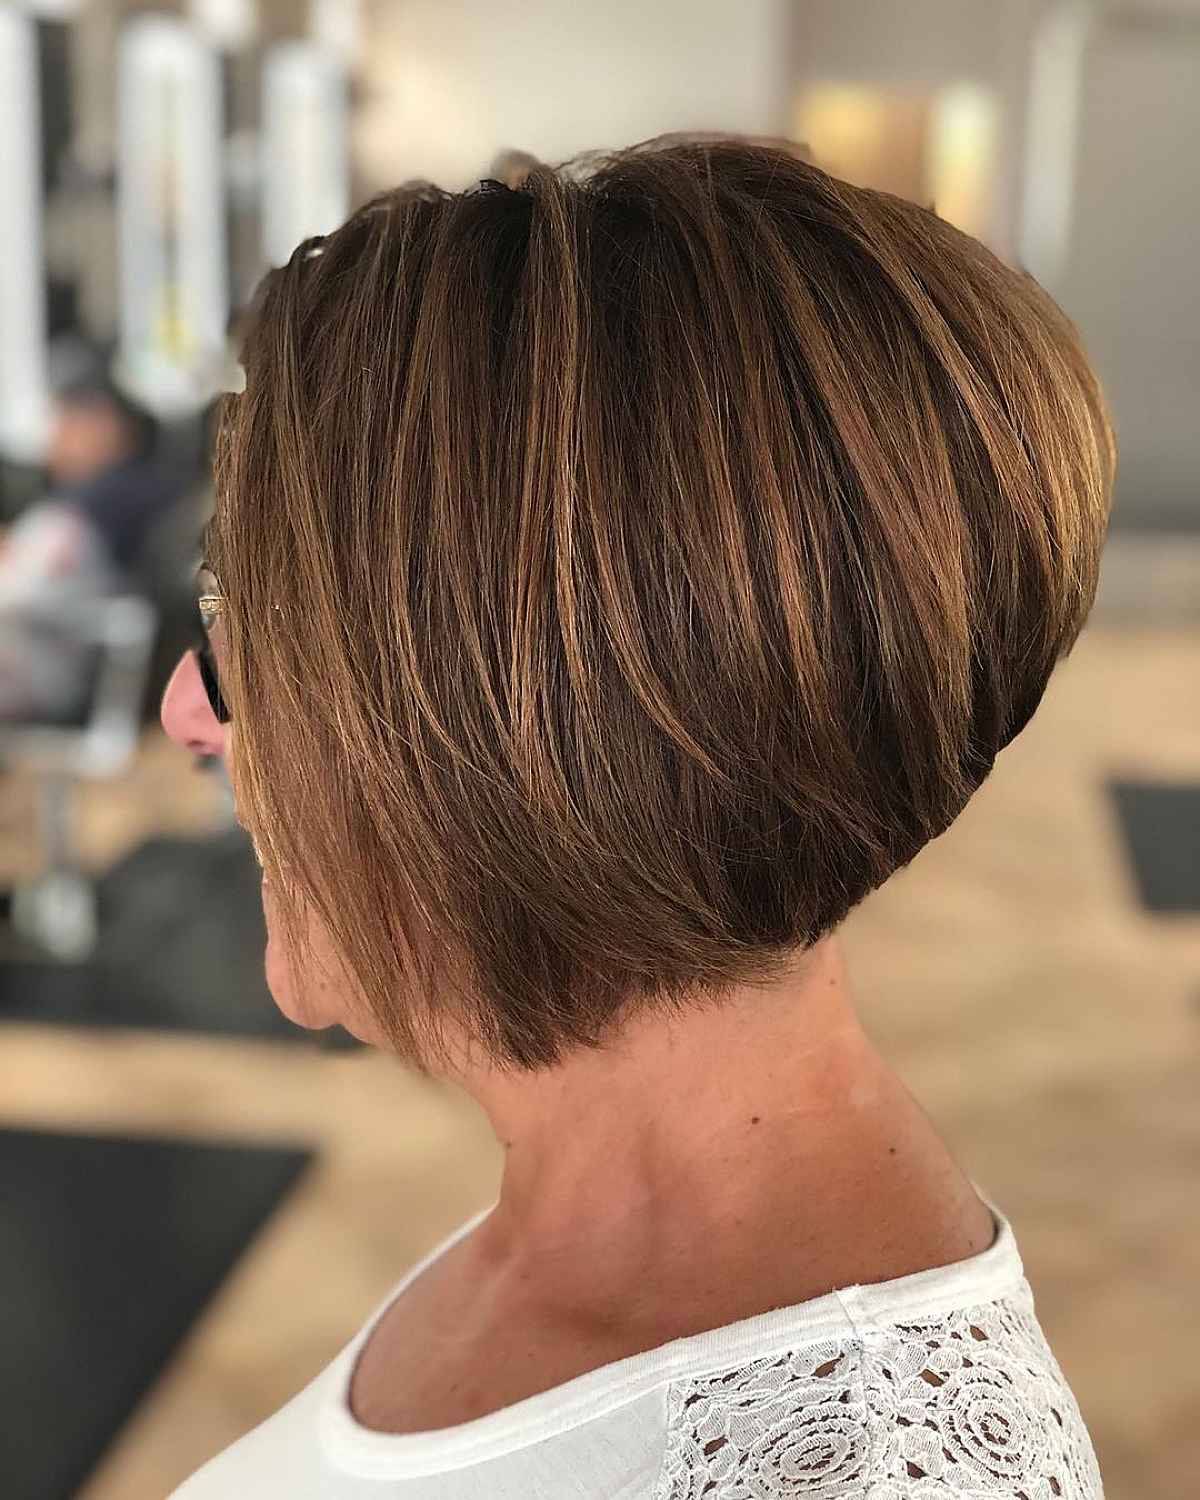 wedge hairstyle great for women over 60